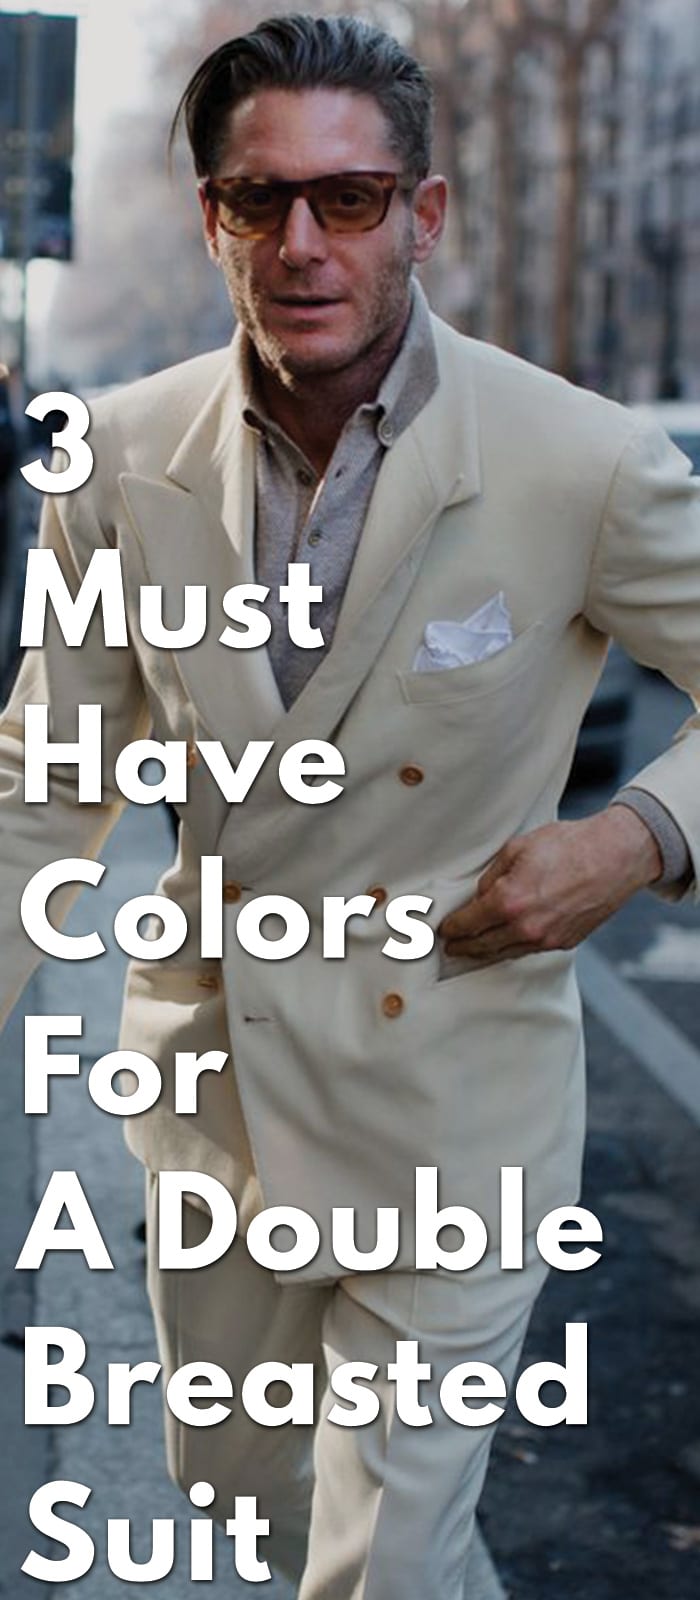 3-Must-Have-Colors-For-A-Double-Breasted-Suit